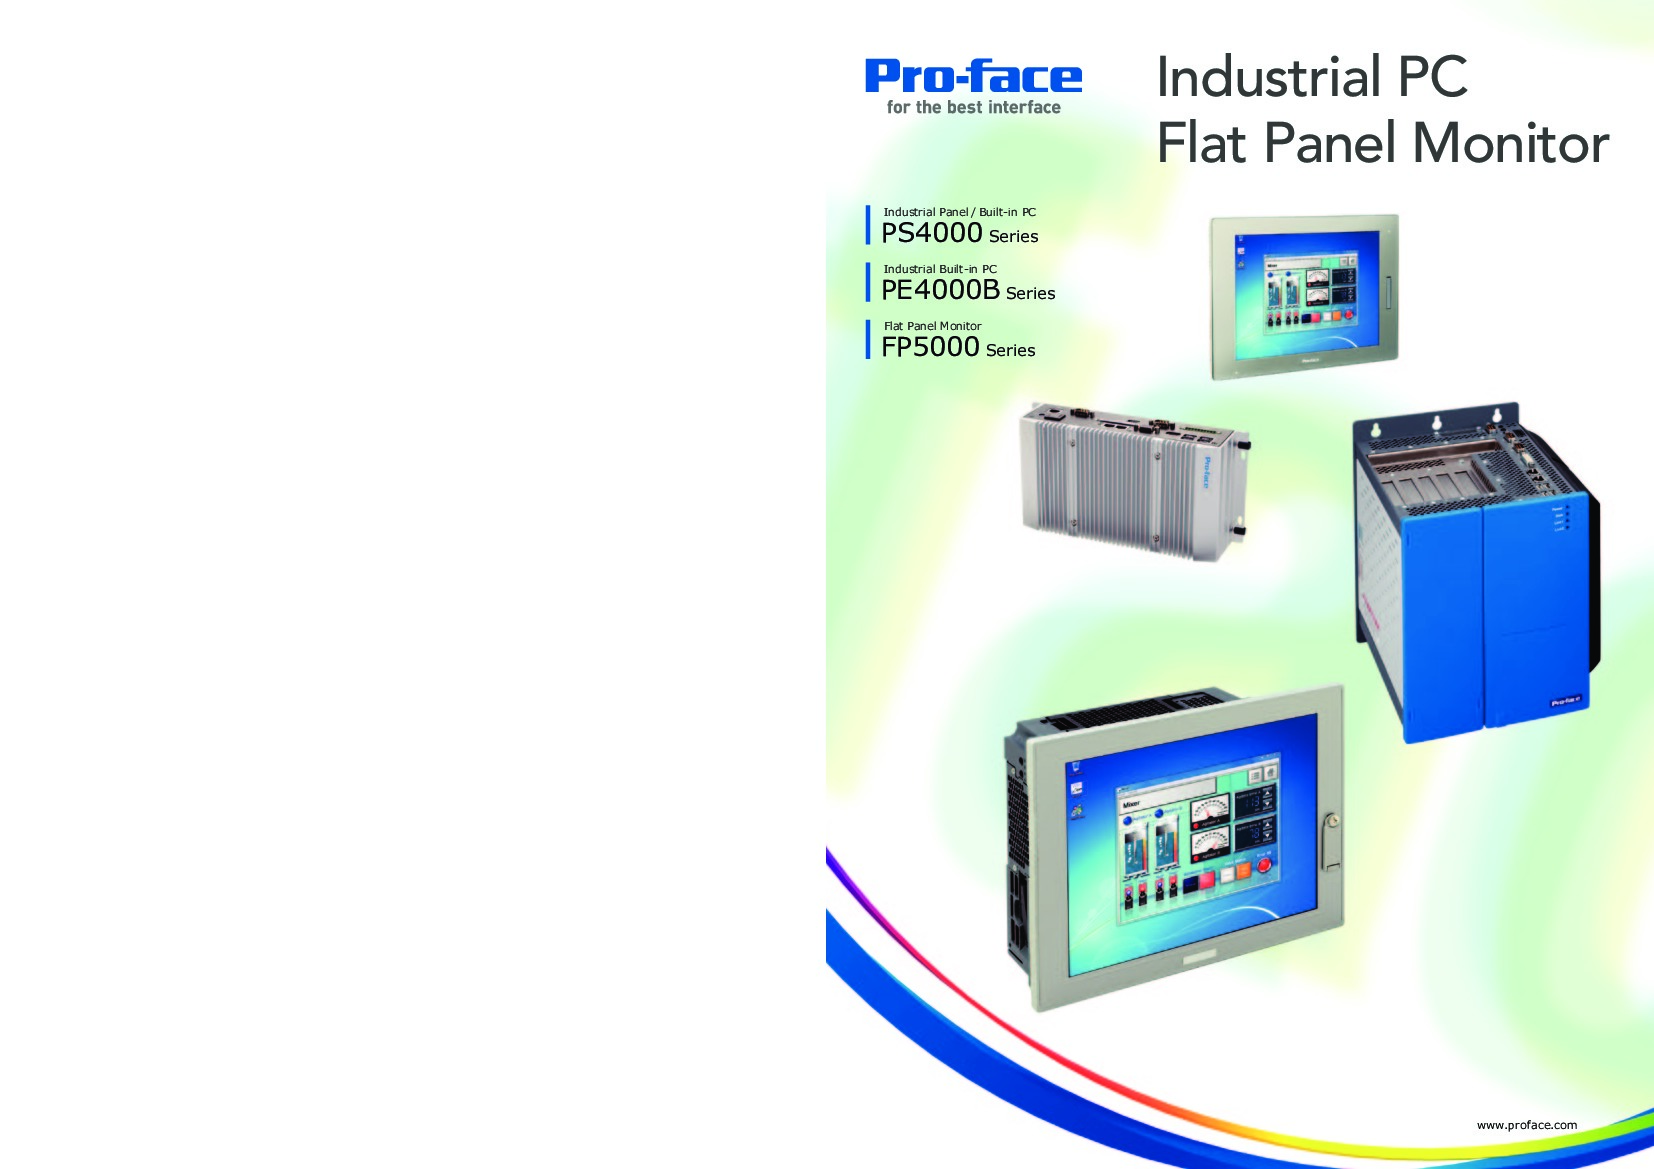 First Page Image of PFXPP170BA20N00N00 PS4000 Series Pro-Face Catalog.pdf